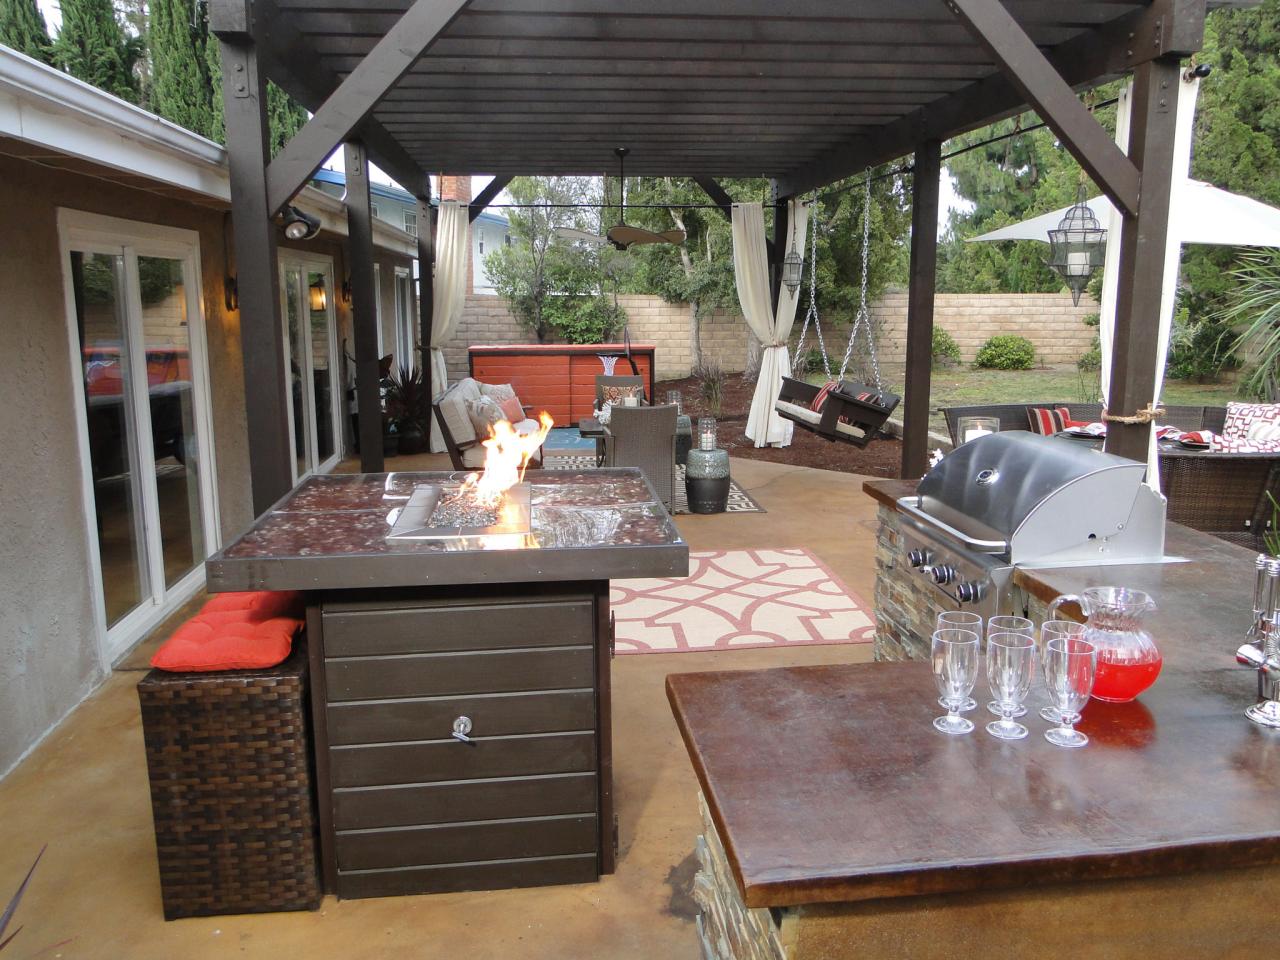 Outdoor Kitchen Islands Pictures, Ideas & Tips From HGTV   HGTV